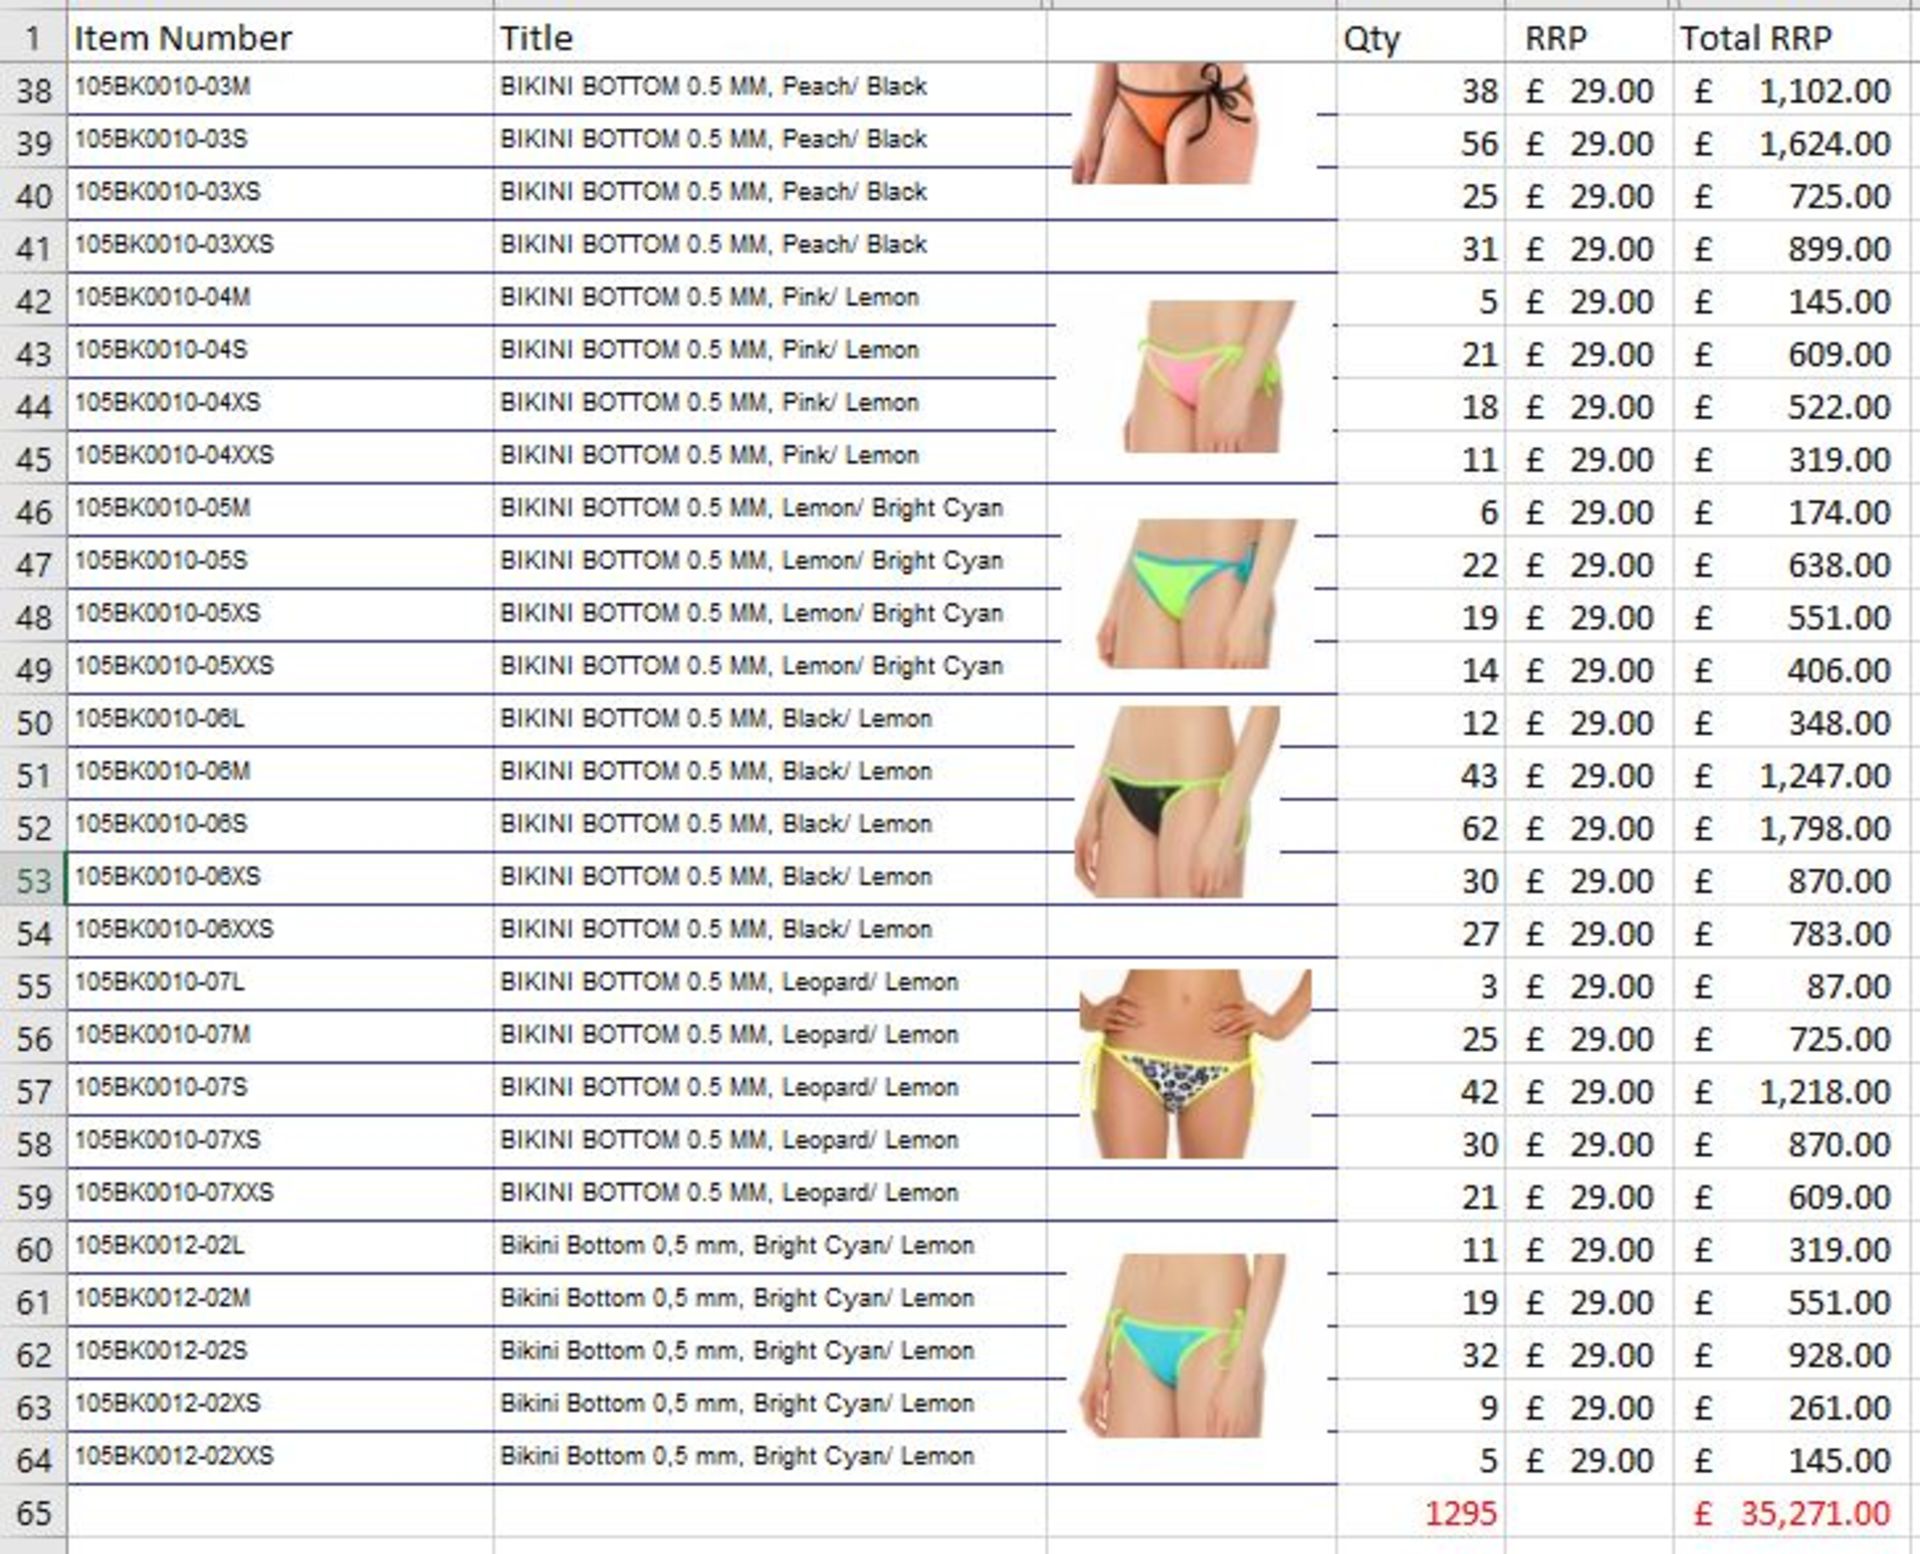 New & Sealed Packaging - Swim Wear - UK Brands - 1295 Items - RRP £35,271.00 - FREE DELIVERY - Image 4 of 8